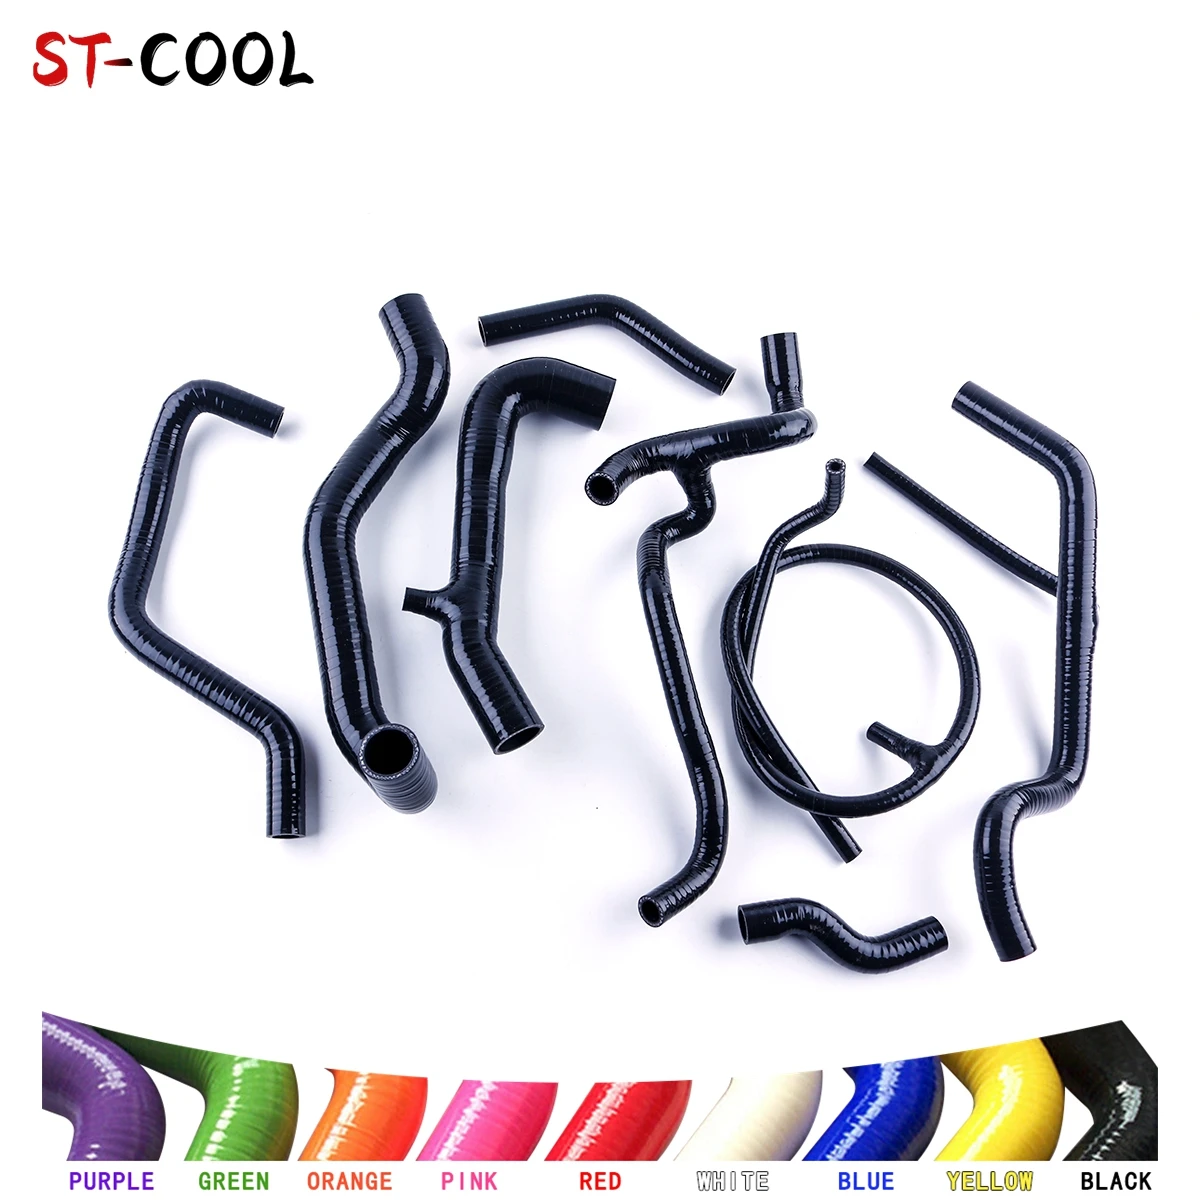 

For VW GOLF 3 VR6 MK3 Jetta A3 GLX 2.8 2.9 AAA / ABV 1994-1998 1995 1996 1997 Silicone Radiator Coolant Hose Pipe Tube Kit 8Pcs